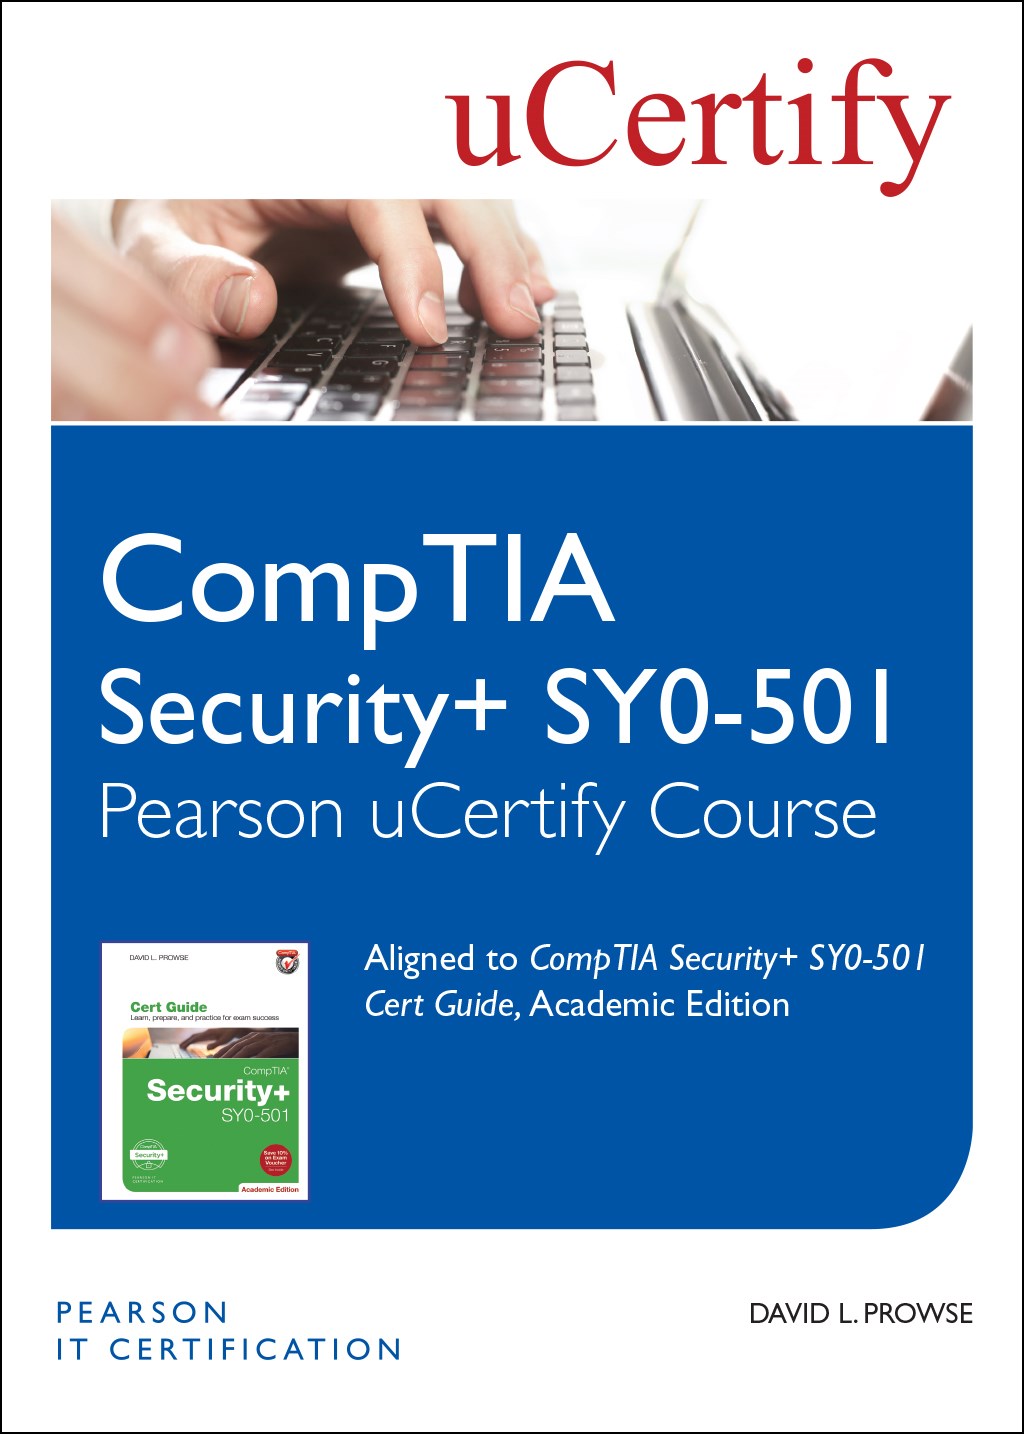 CompTIA Security+ SY0-501 Pearson uCertify Course Student Access Card, 2nd Edition